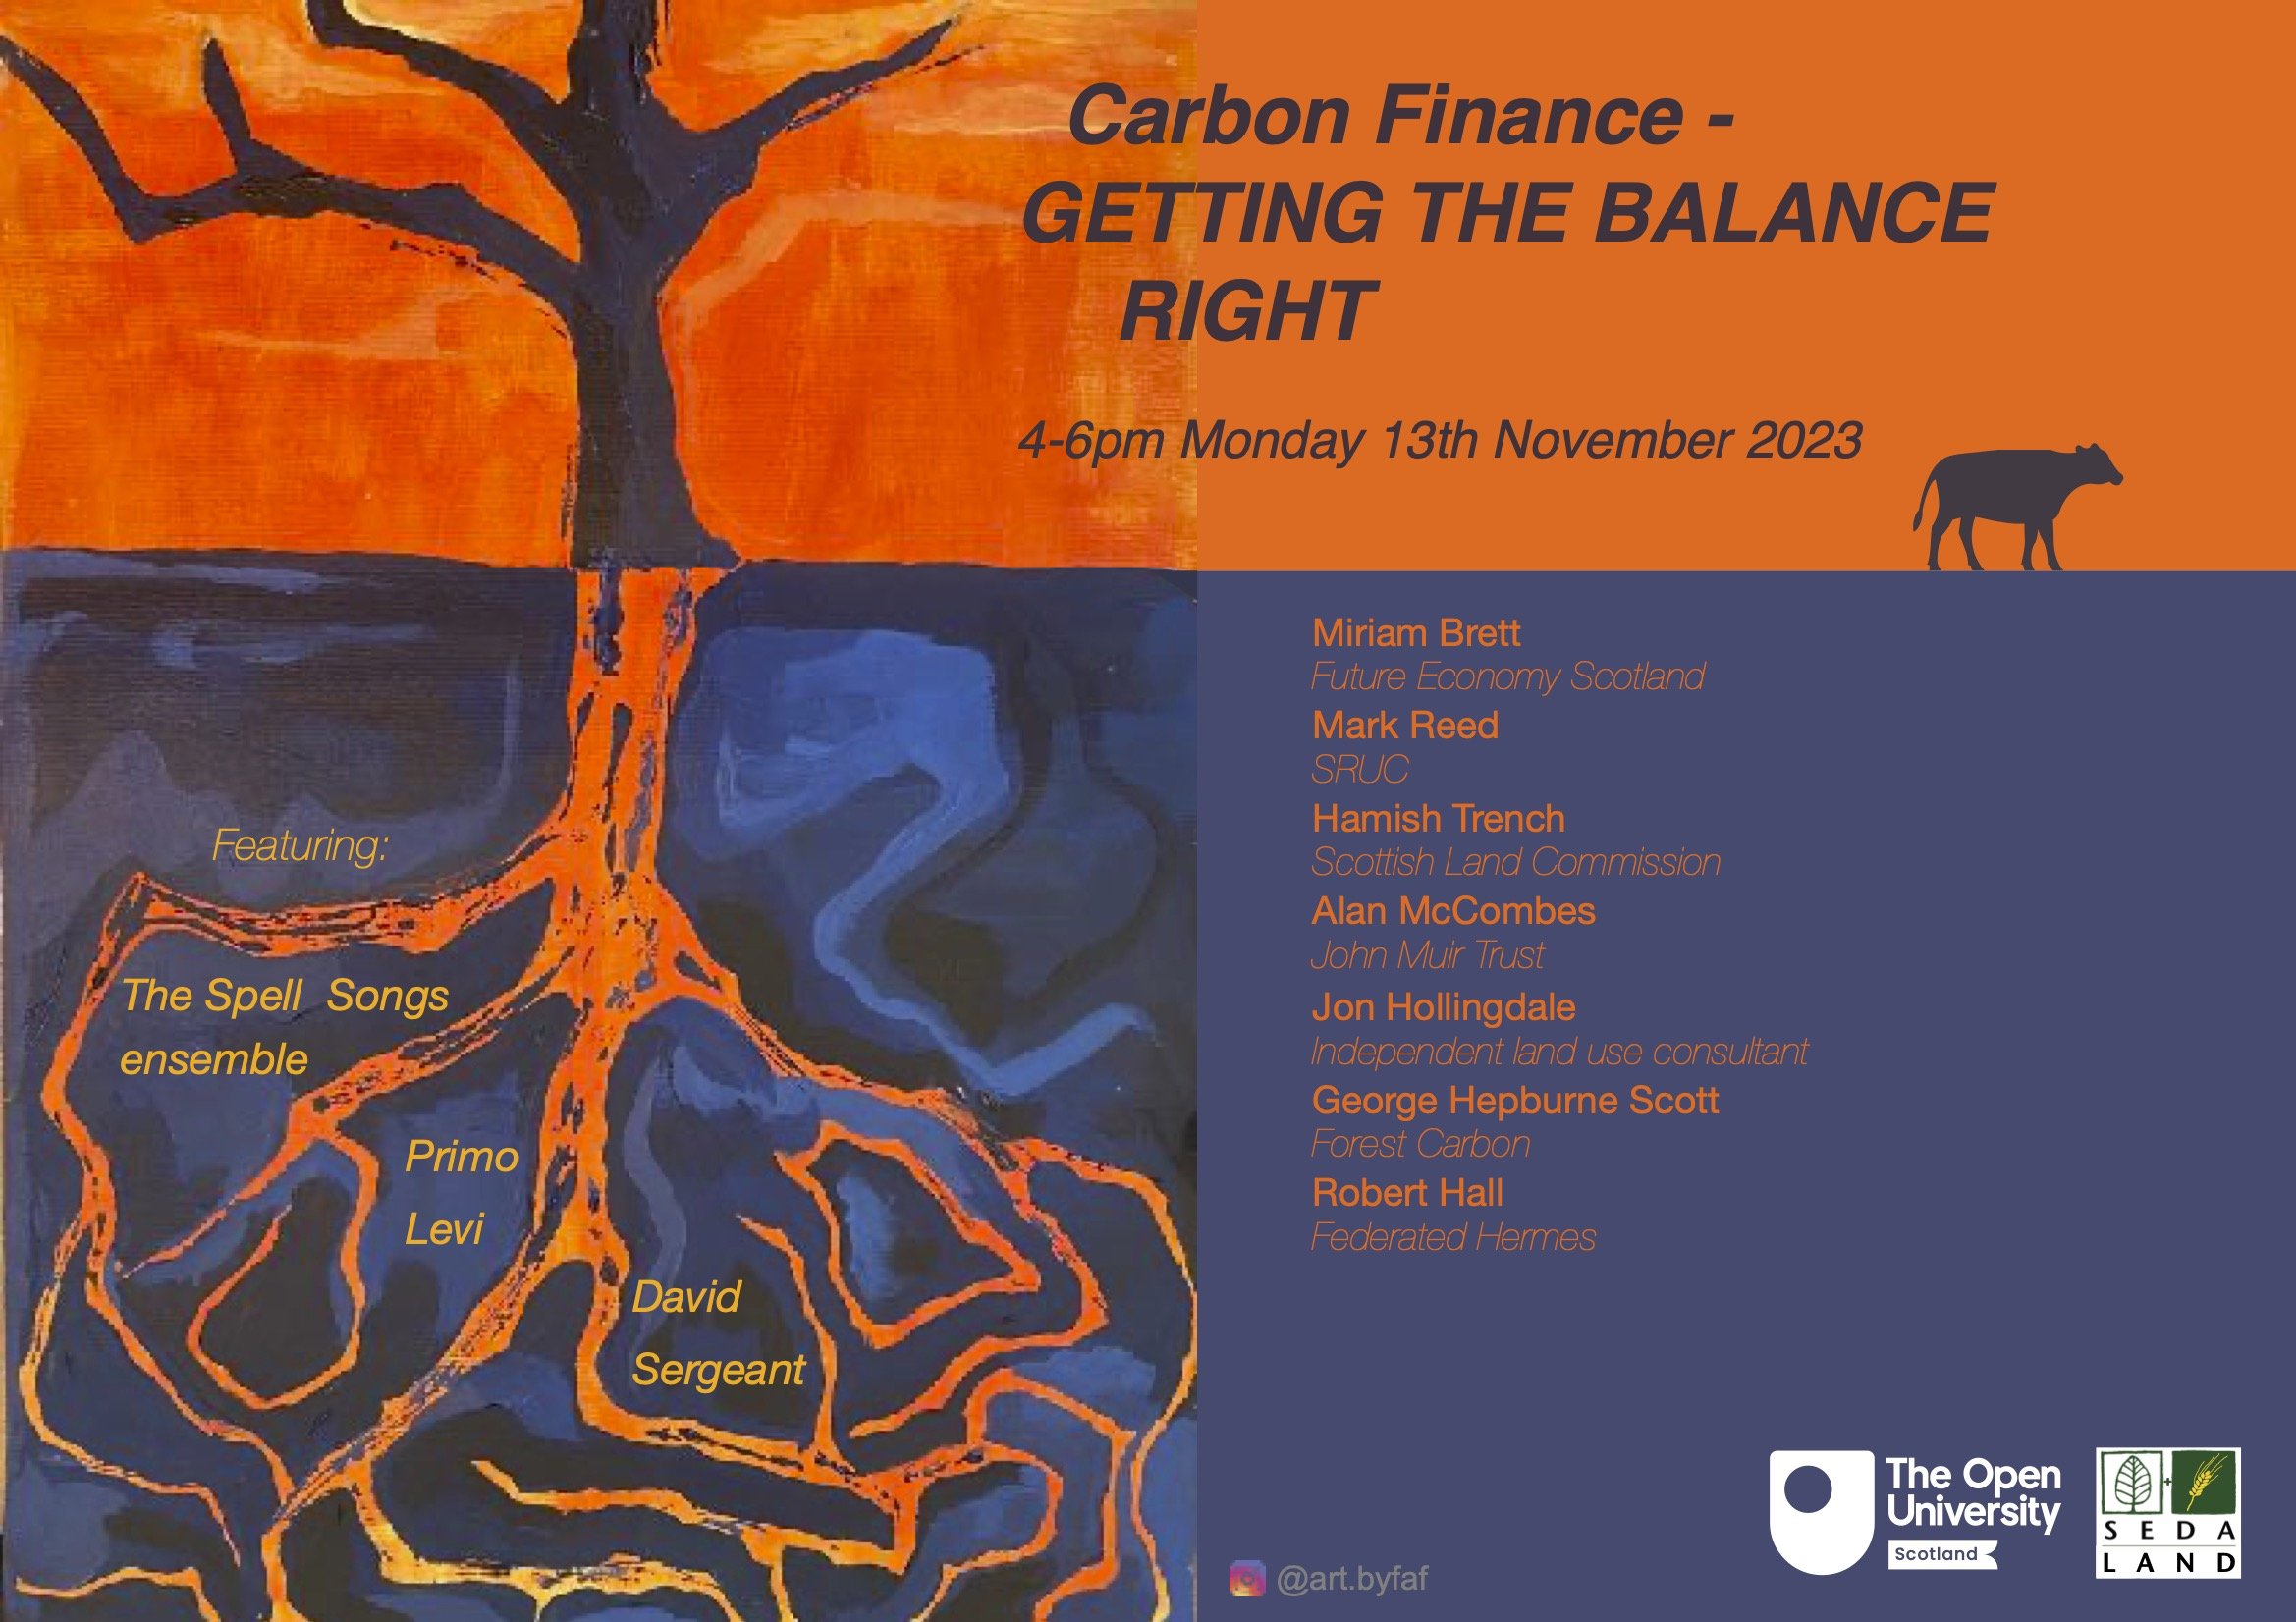 Carbon Finance - Getting the Balance Right